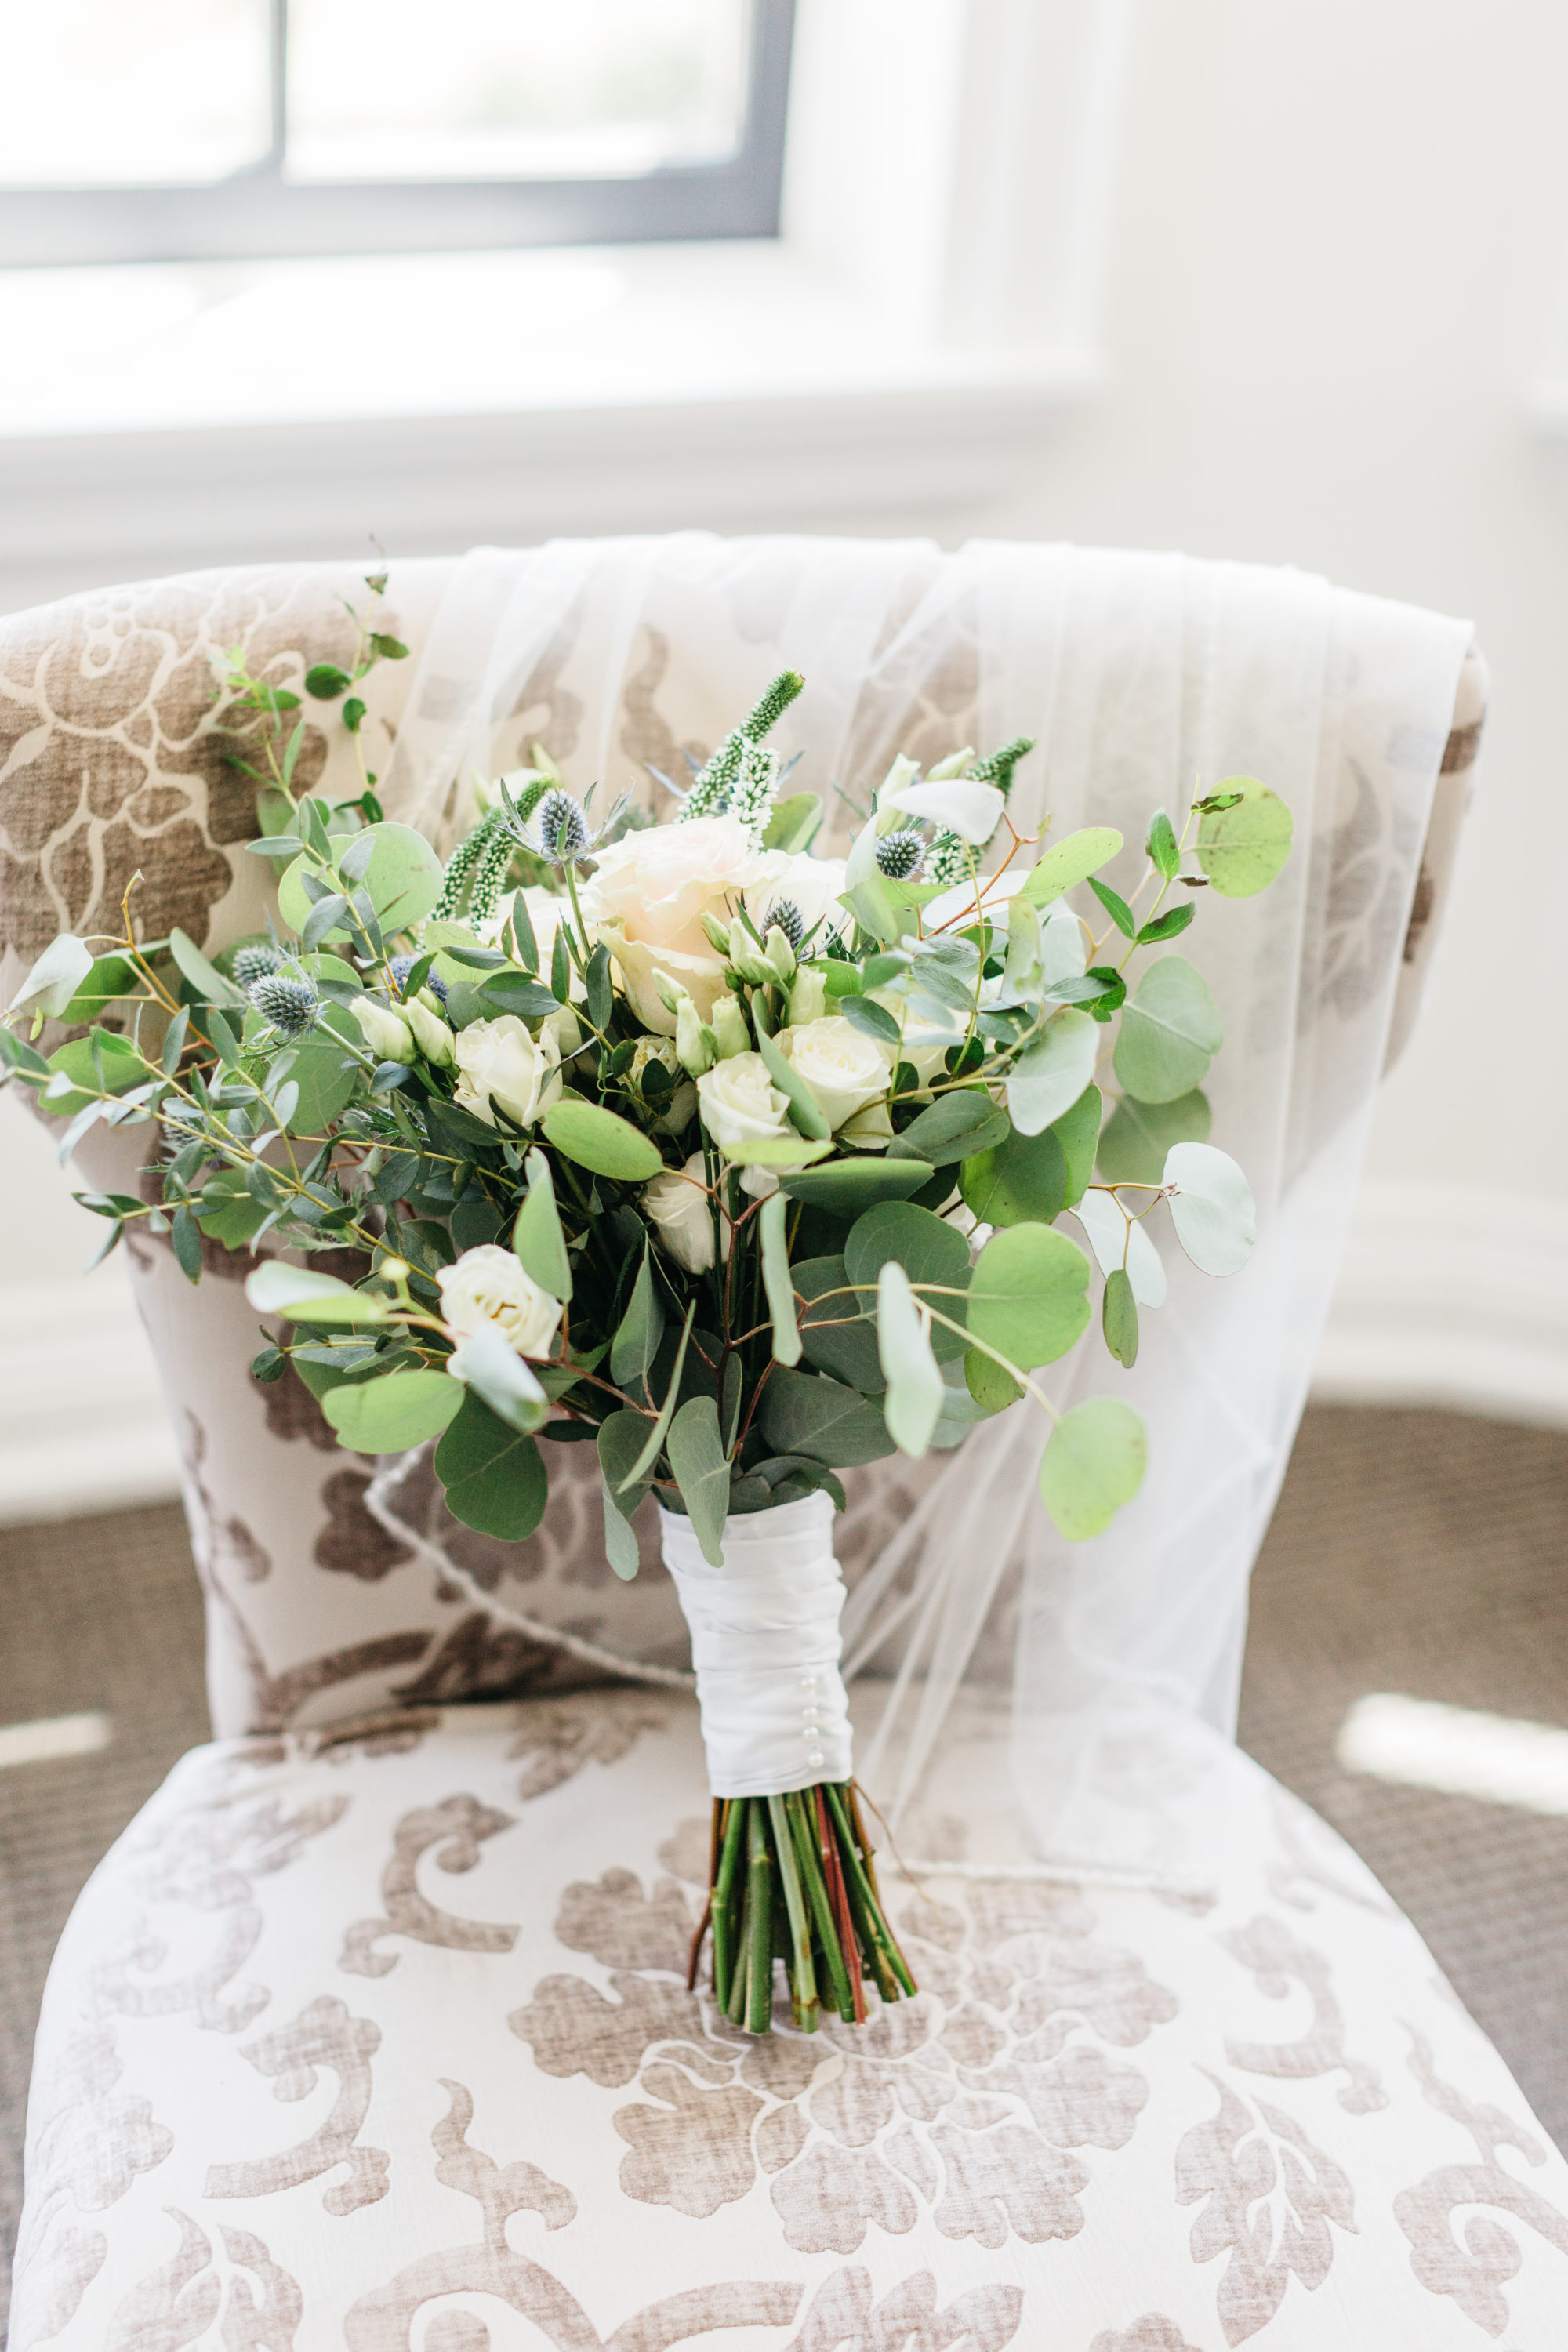 Bride's florals on chair